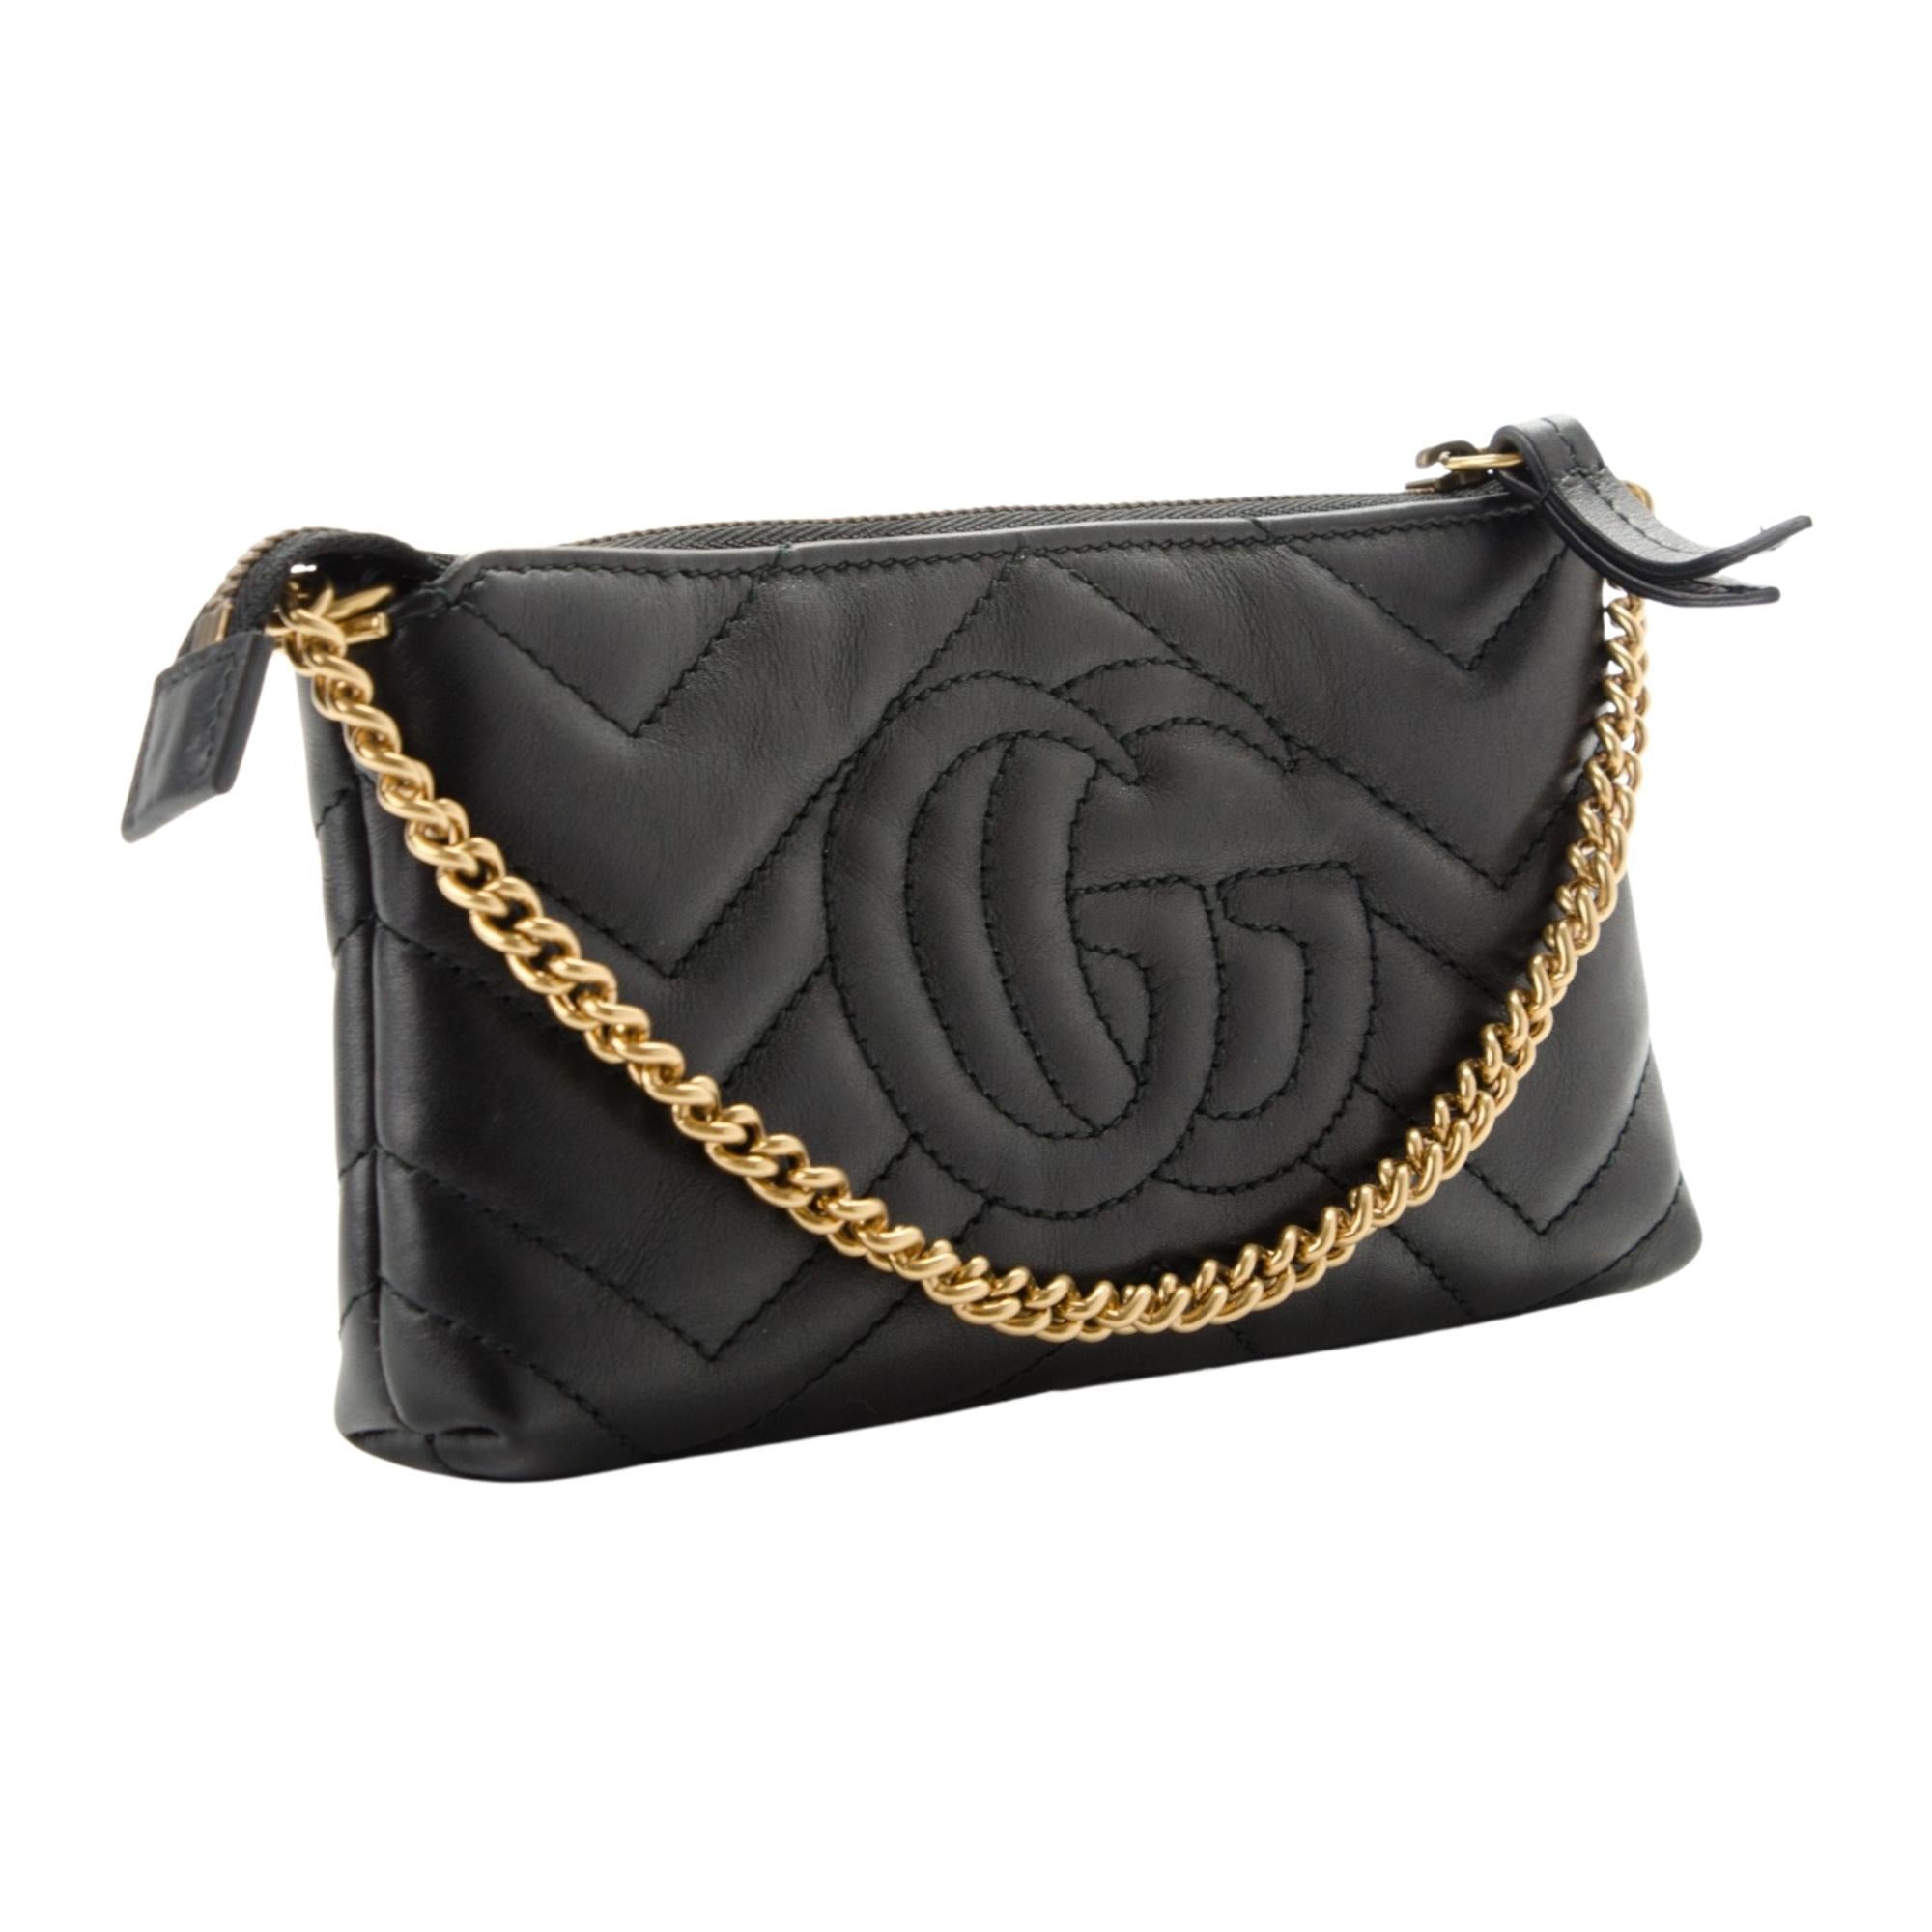 This shoulder bag is crafted of smooth & supple calfskin leather in classic black. This bag features an antiqued gold chain strap and a small antiqued gold GG logo on the front. The top zipper opens to a light beige interior.

COLOR: Black
MATERIAL: